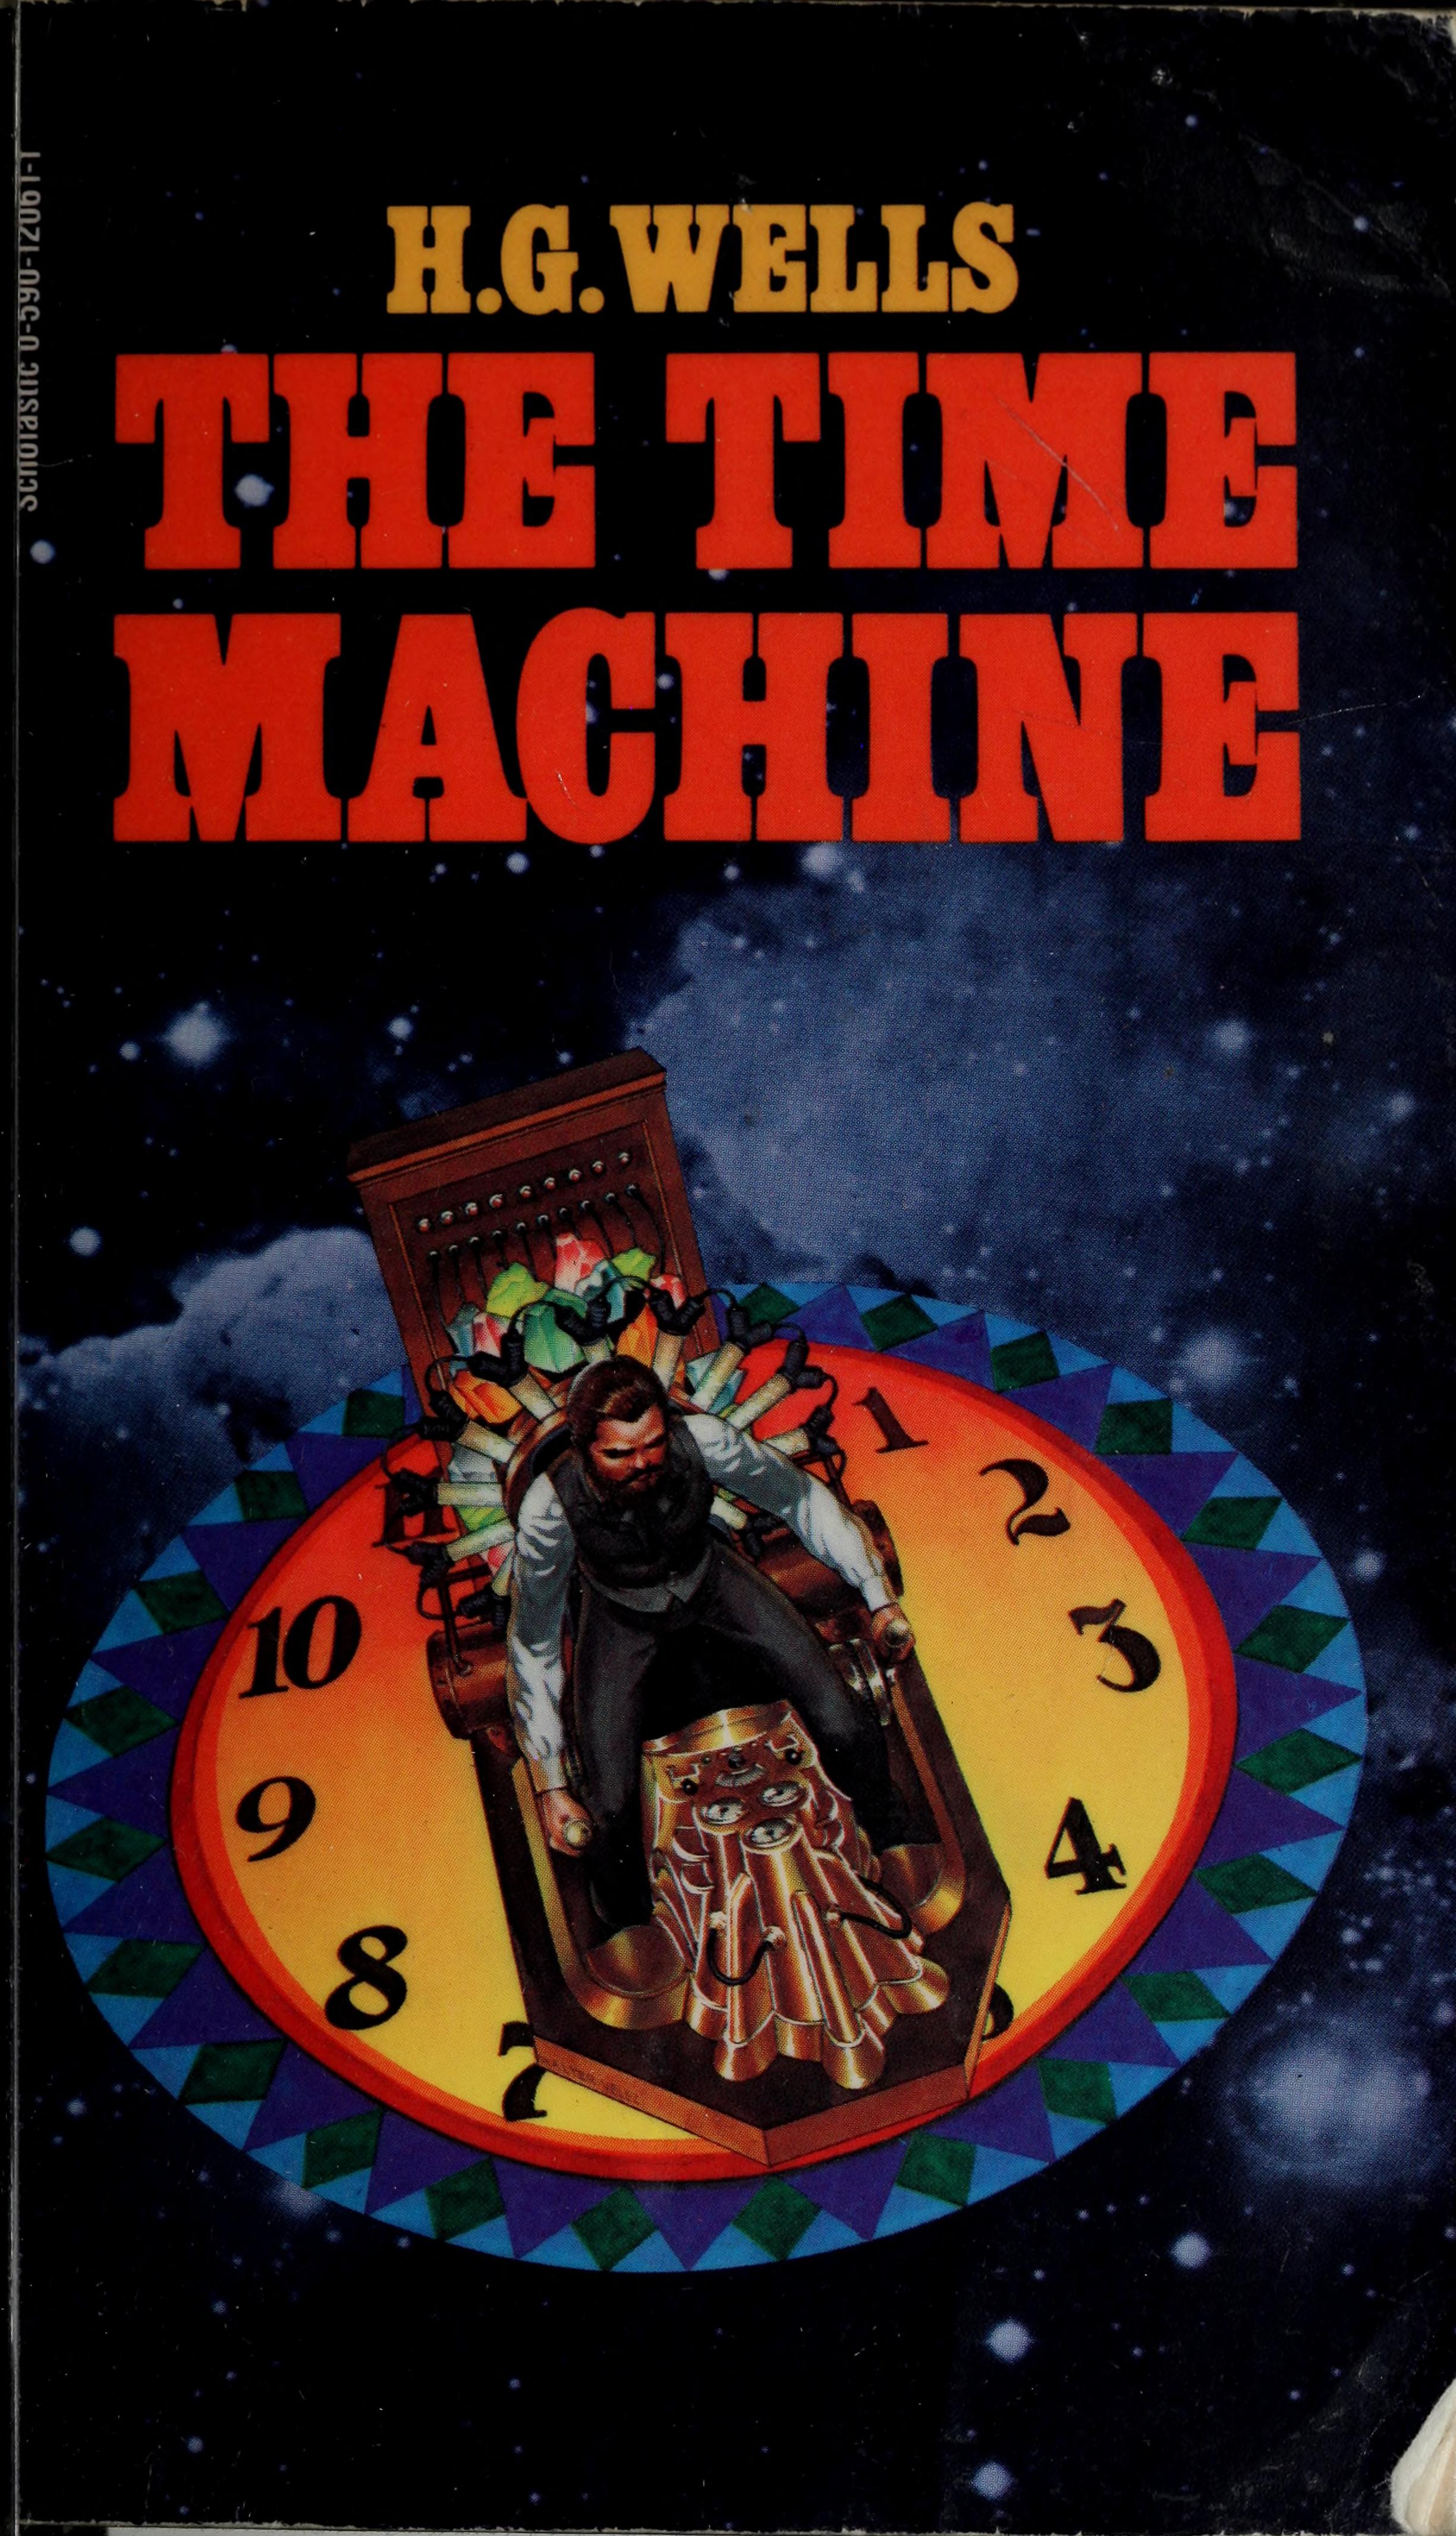 H. G. Wells, H. G. Wells (Duplicate): Time Machine by Herbert George Wells (Science Fiction and Time Travel Novel) the Annotated Classic Edition (2020, Independently Published)